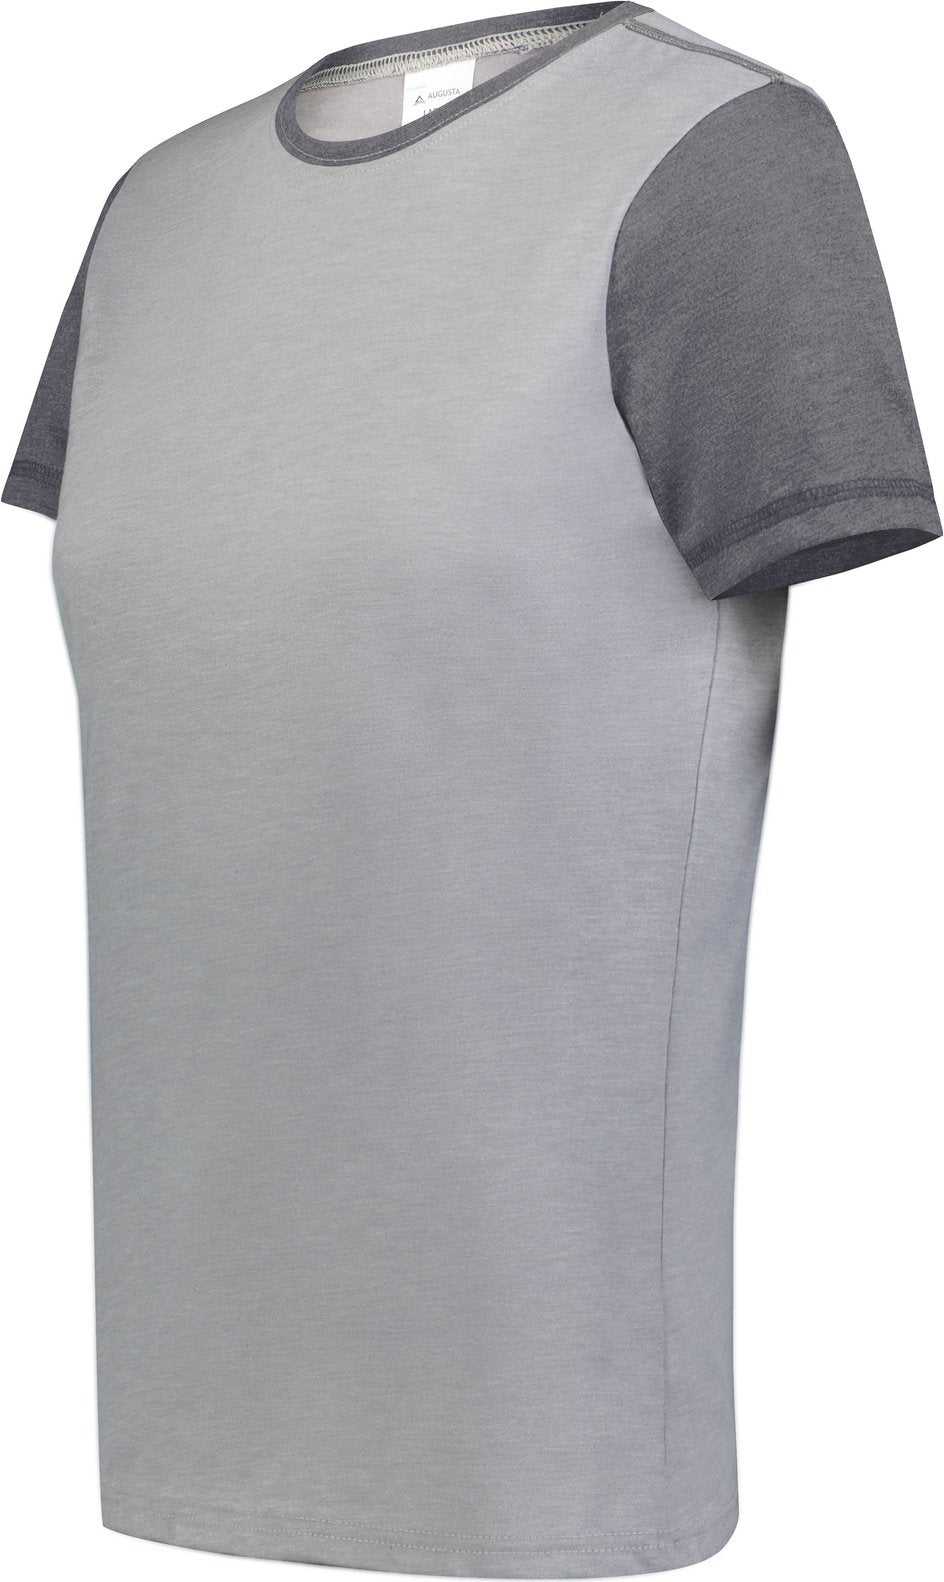 Augusta 6878 Ladies Gameday Vintage Ringer Tee - Gray Heather Carbon Heather - HIT a Double